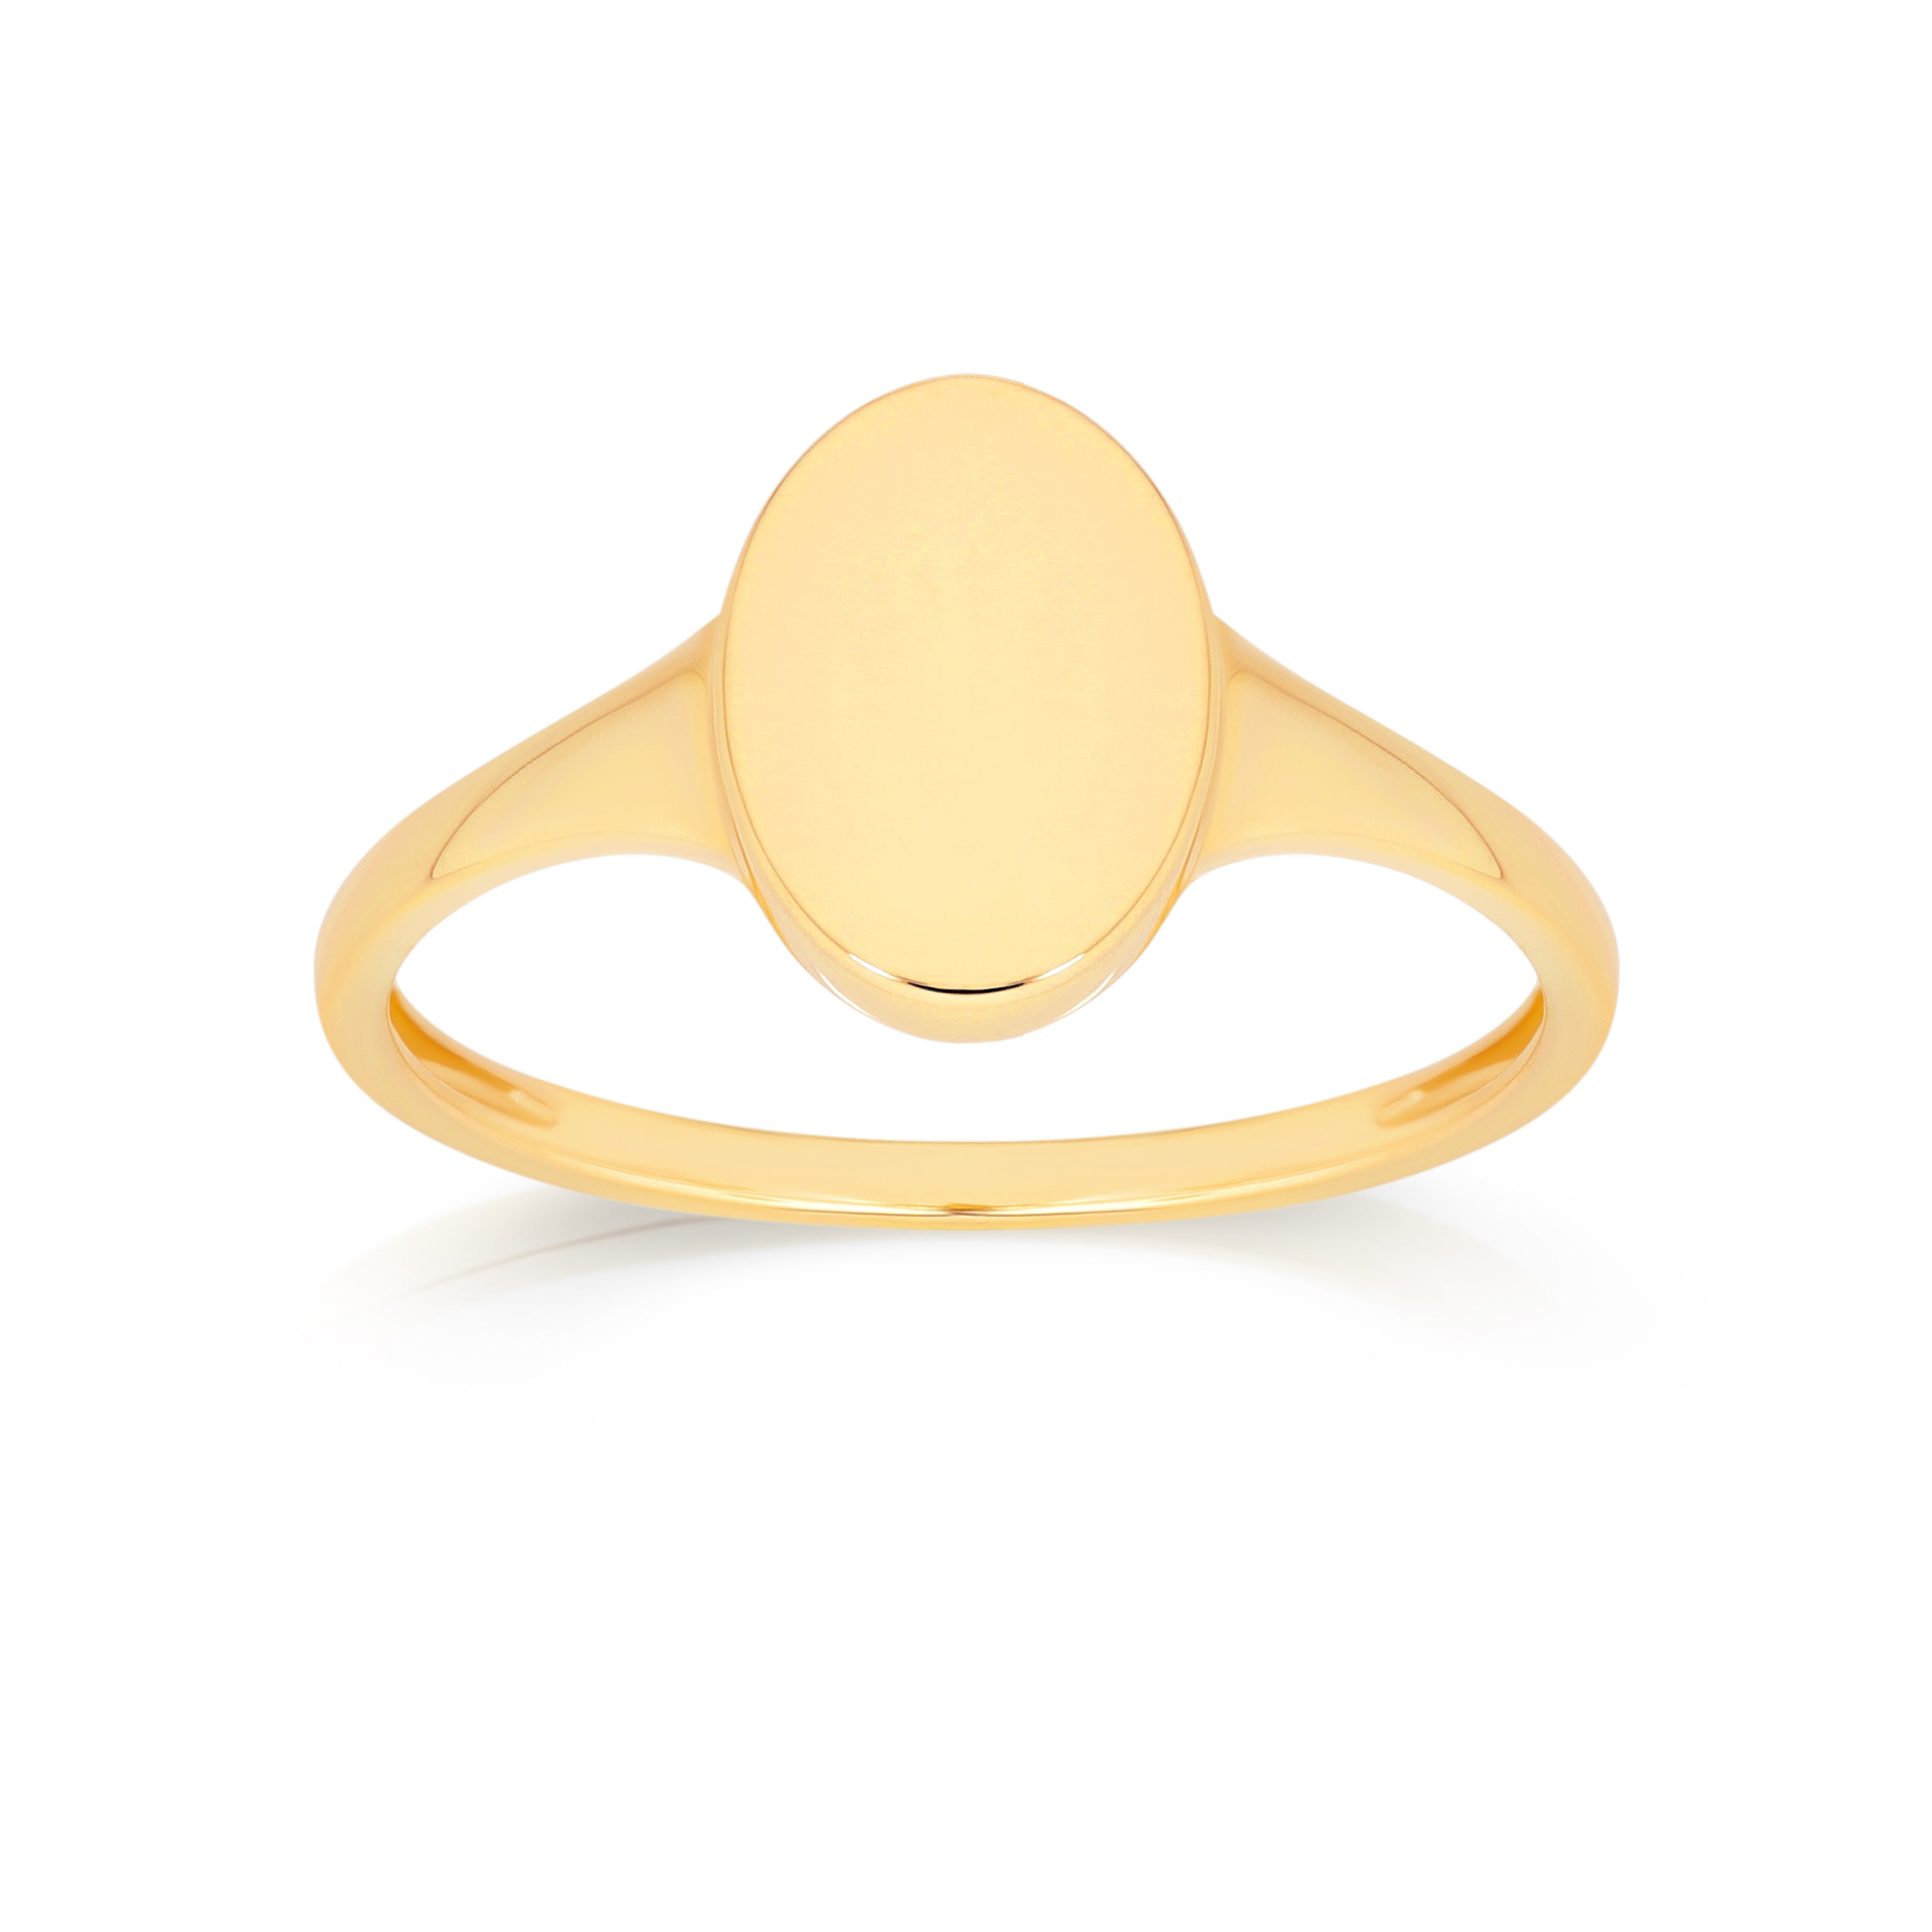 9ct polished oval signet ring